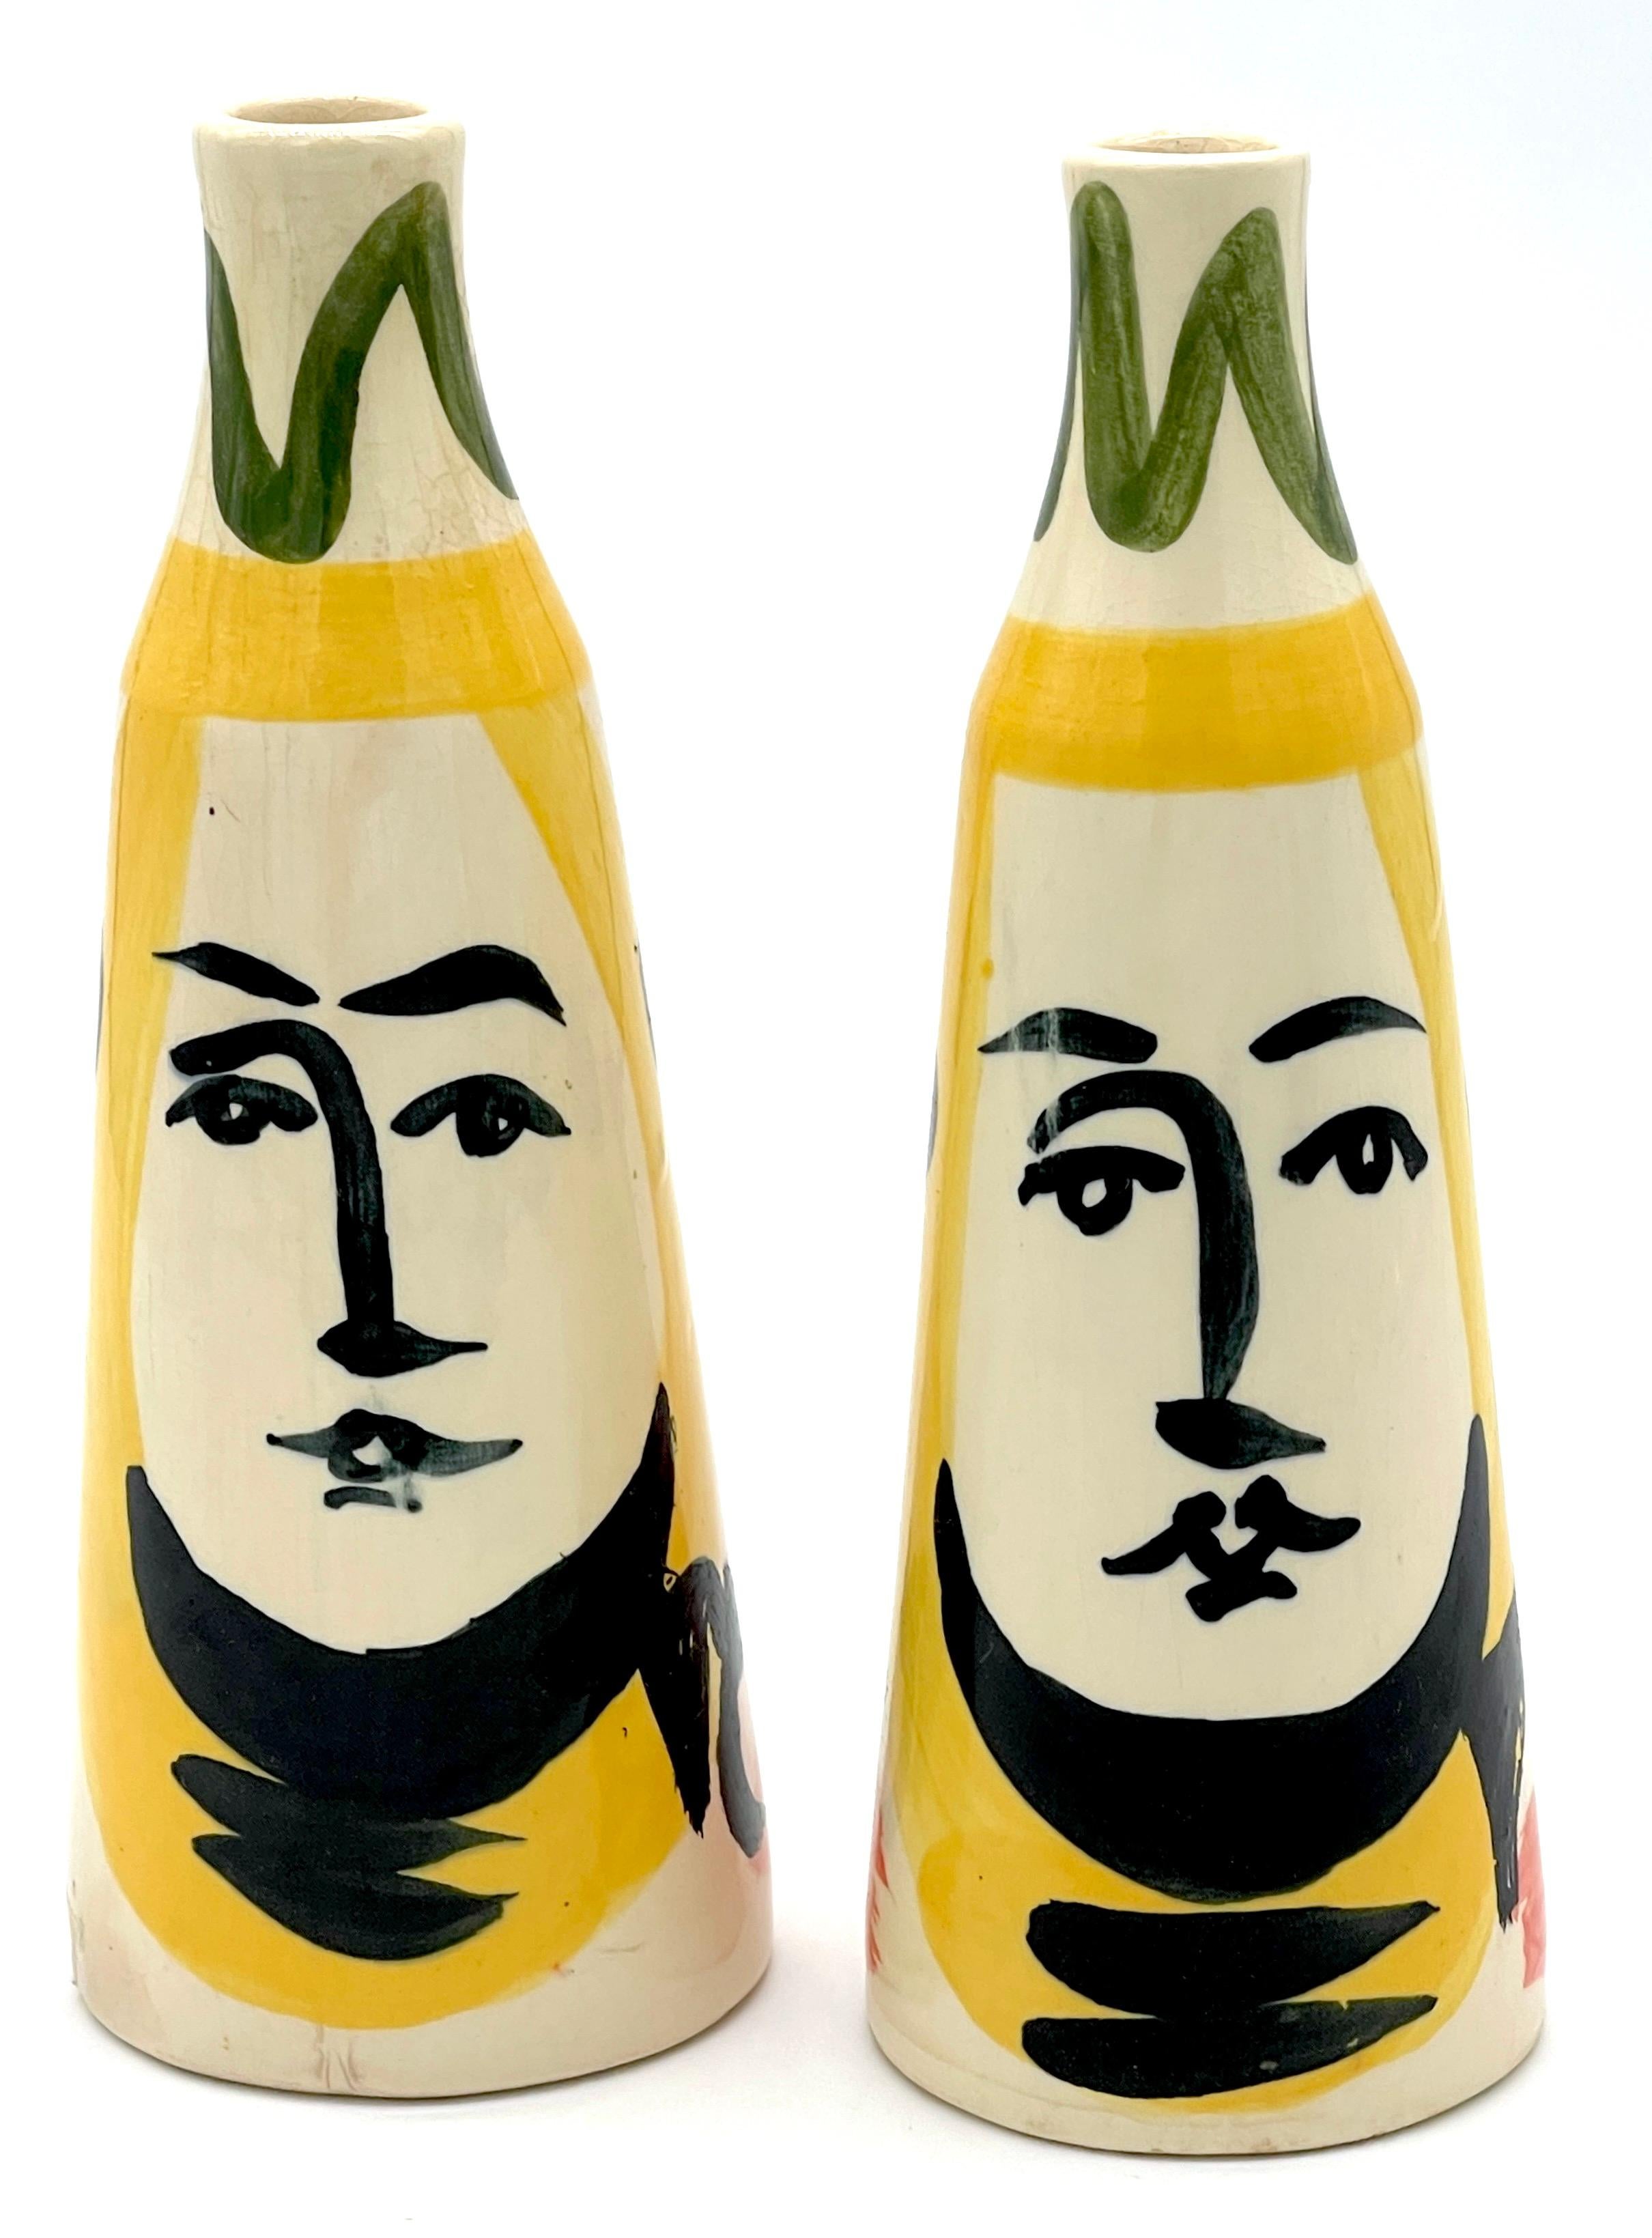 Pair of Stamped Edition Padilla Picasso Pottery Conical Face Vases
After Pablo Picasso
Each one stamped 'Femo 1944 Edition Picasso Padilla  hv Mexico '

A fine pair of stamped edition Padilla Picasso pottery conical face vases, paying homage to the